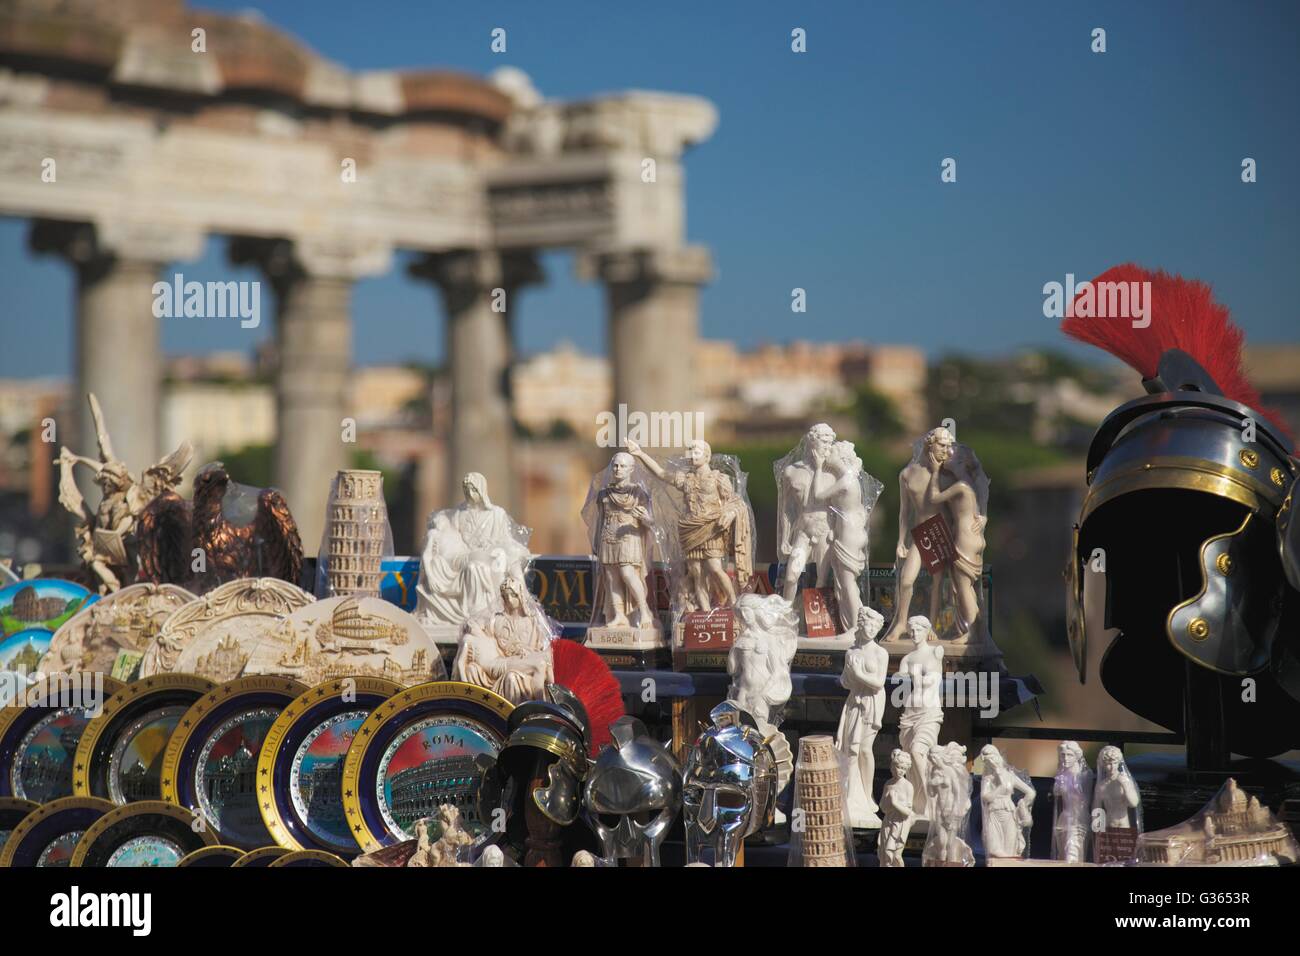 Souvenirs for sale in the Roman Forum, Rome, Italy, Europe Stock Photo